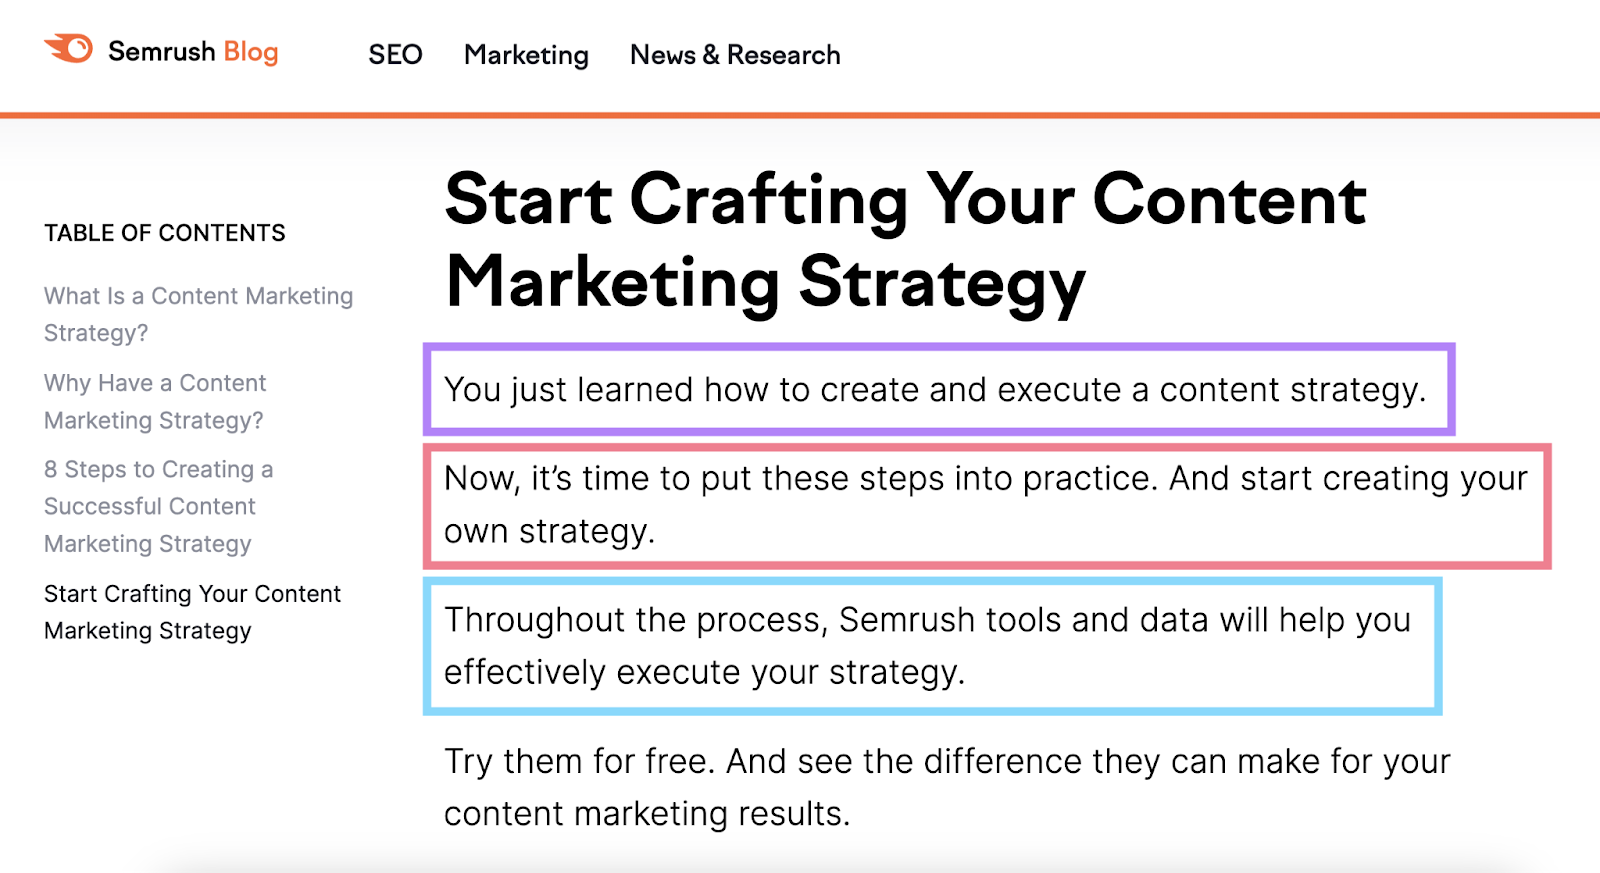 A conclusion of Semrush's article on The Ultimate Guide to Creating a Content Marketing Strategy